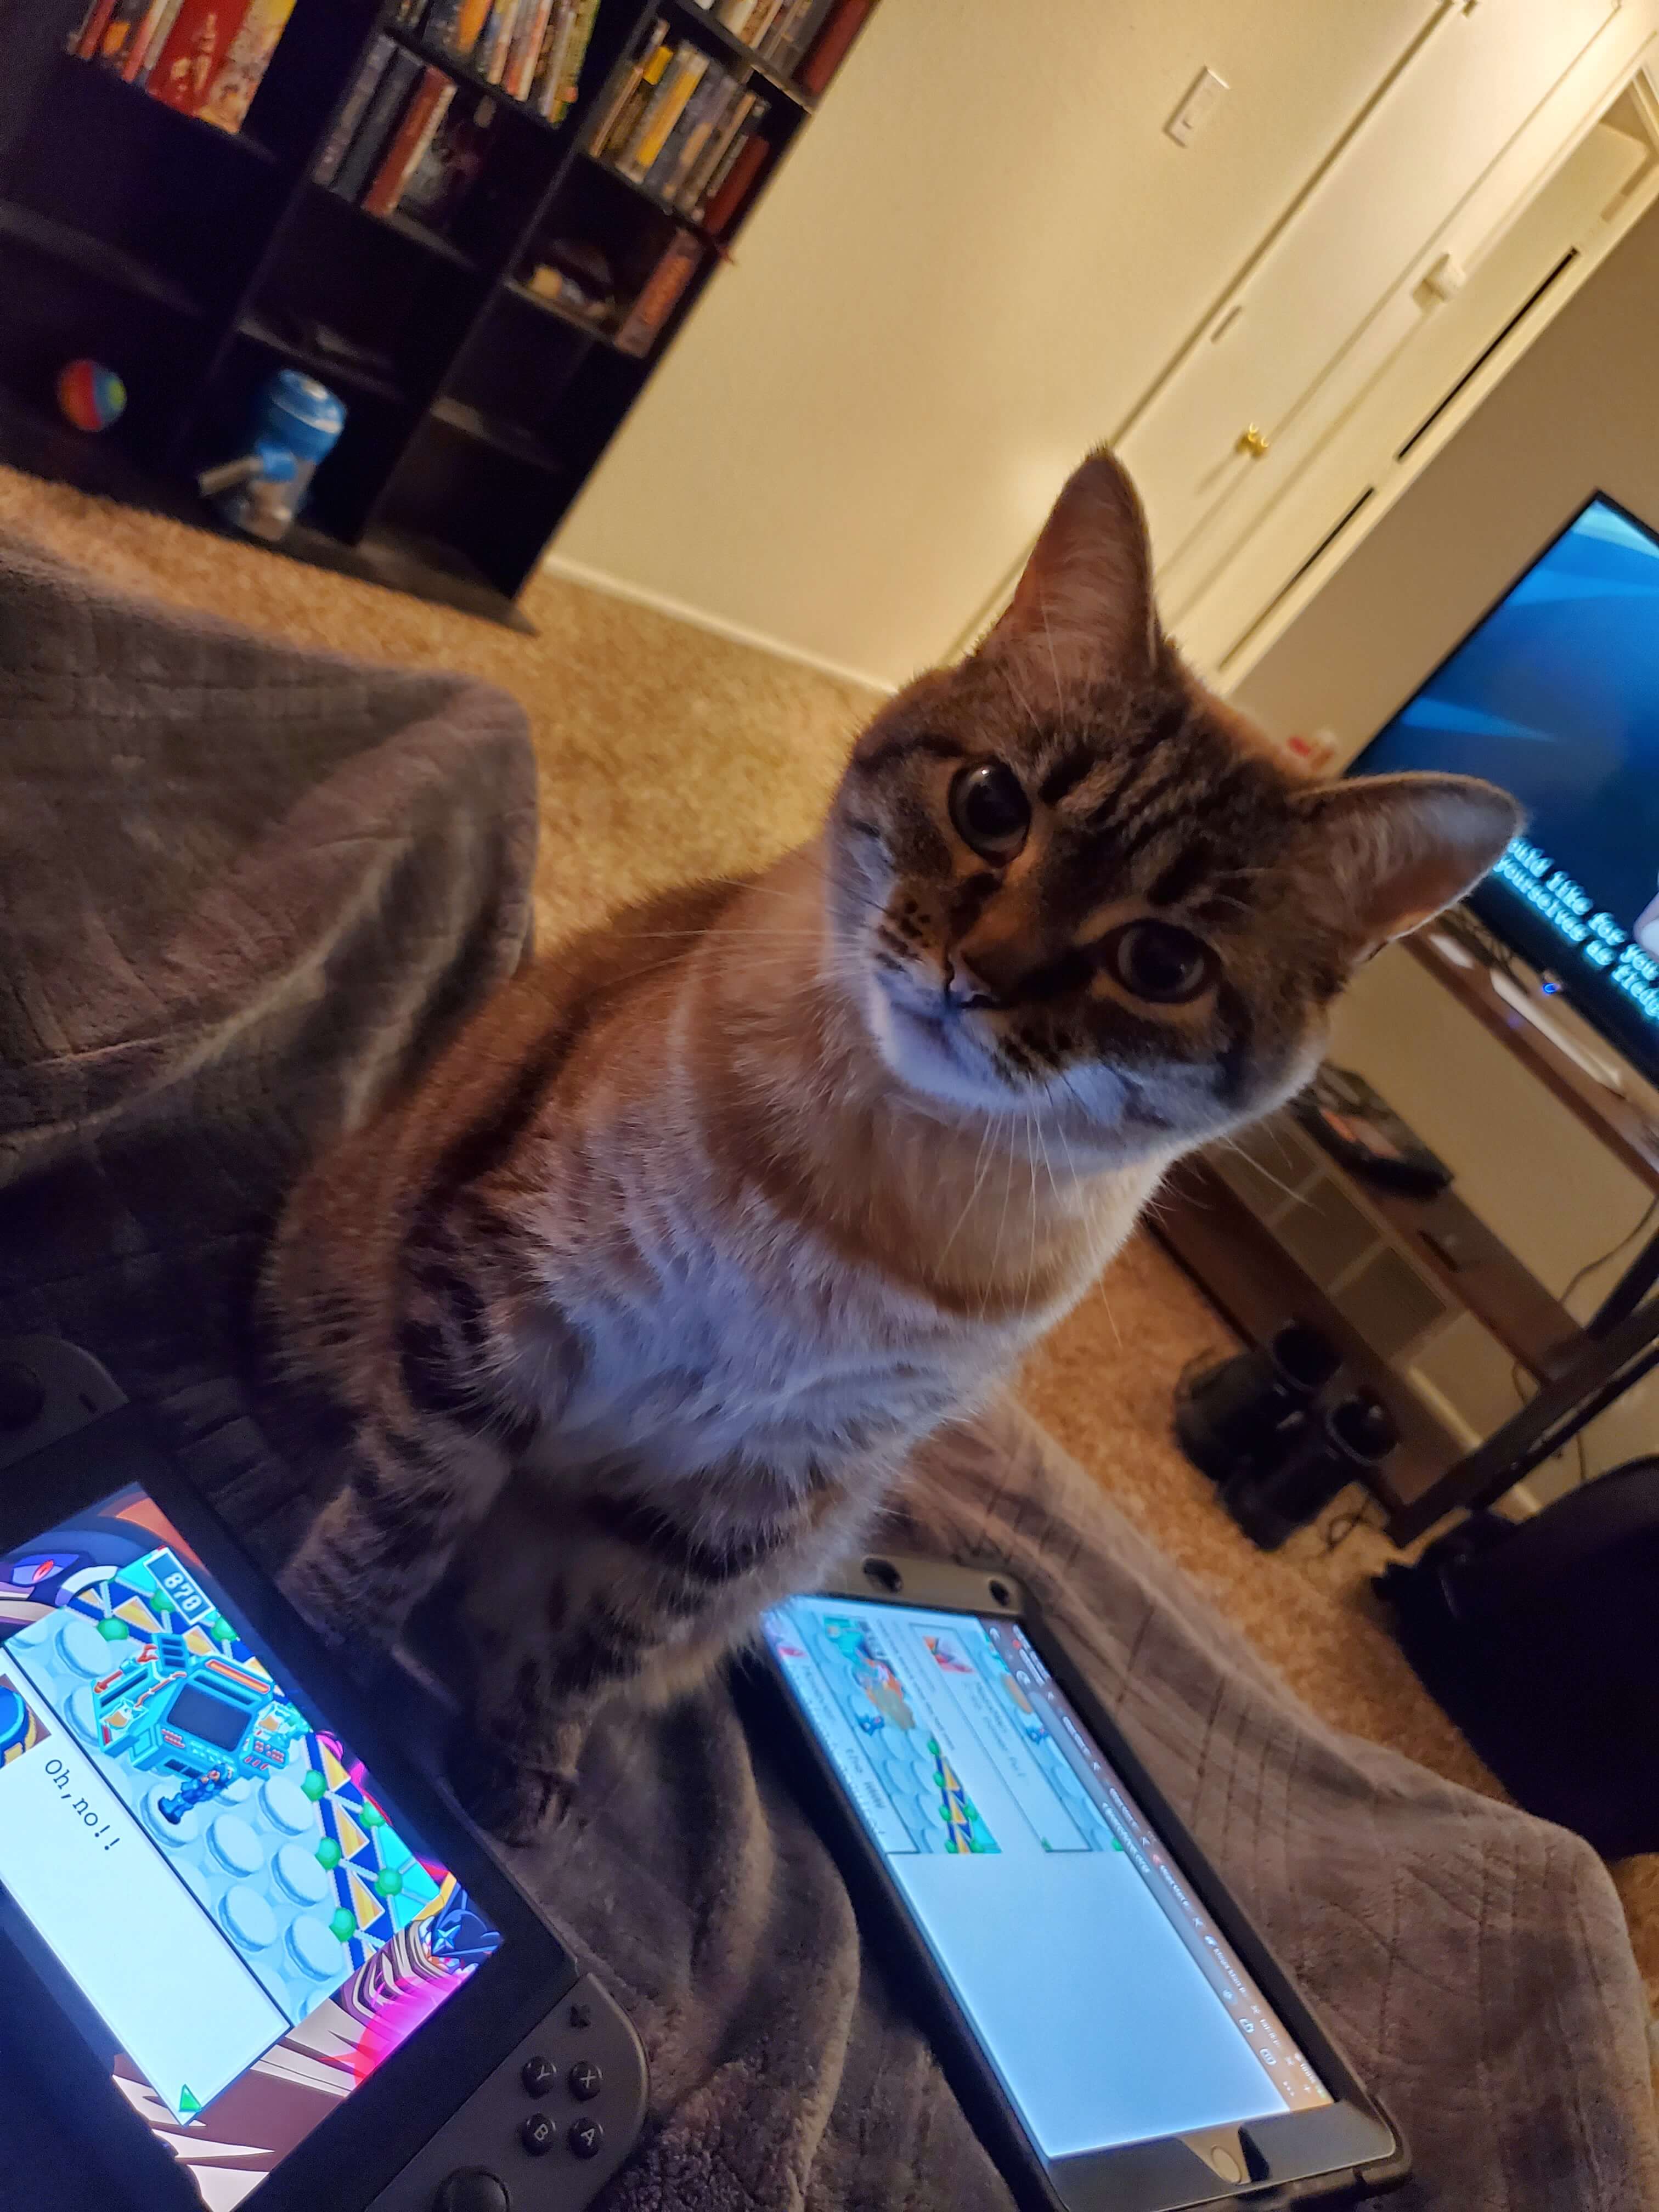 You're really going to play video games instead of pet me?